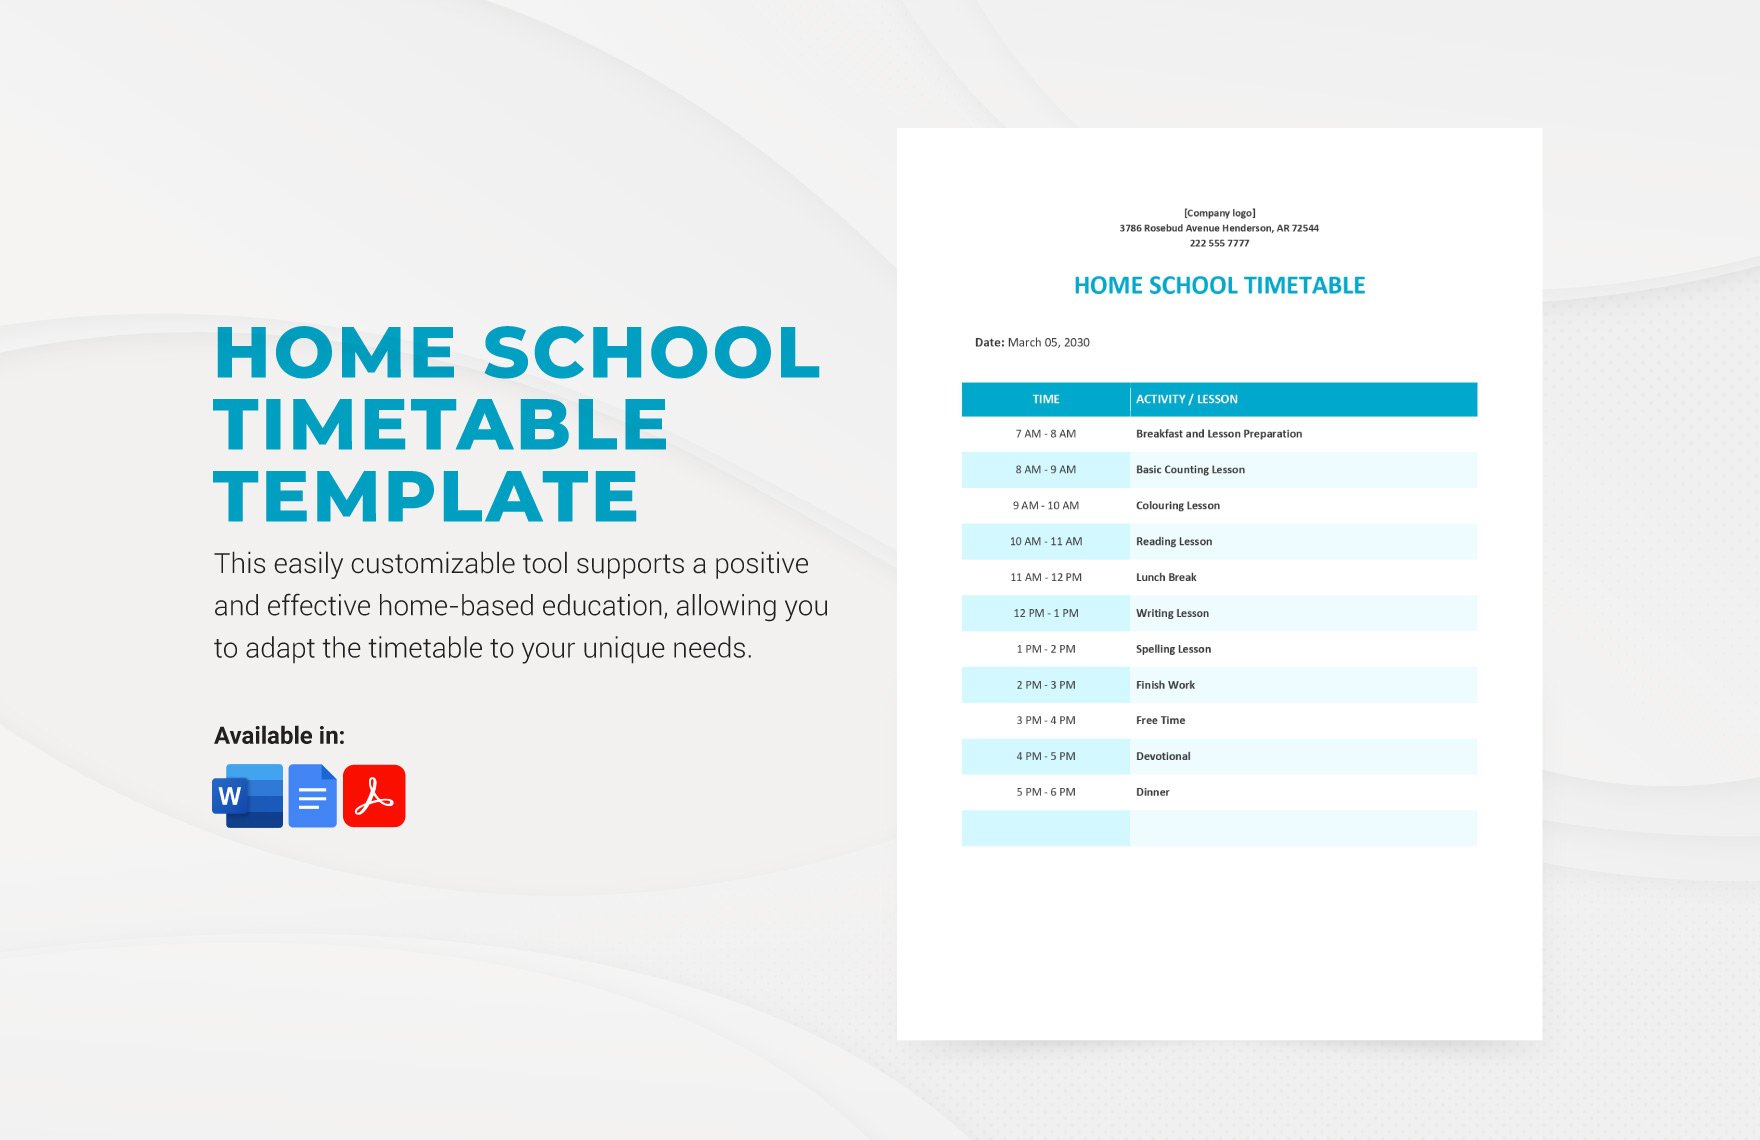 Home School Timetable Template